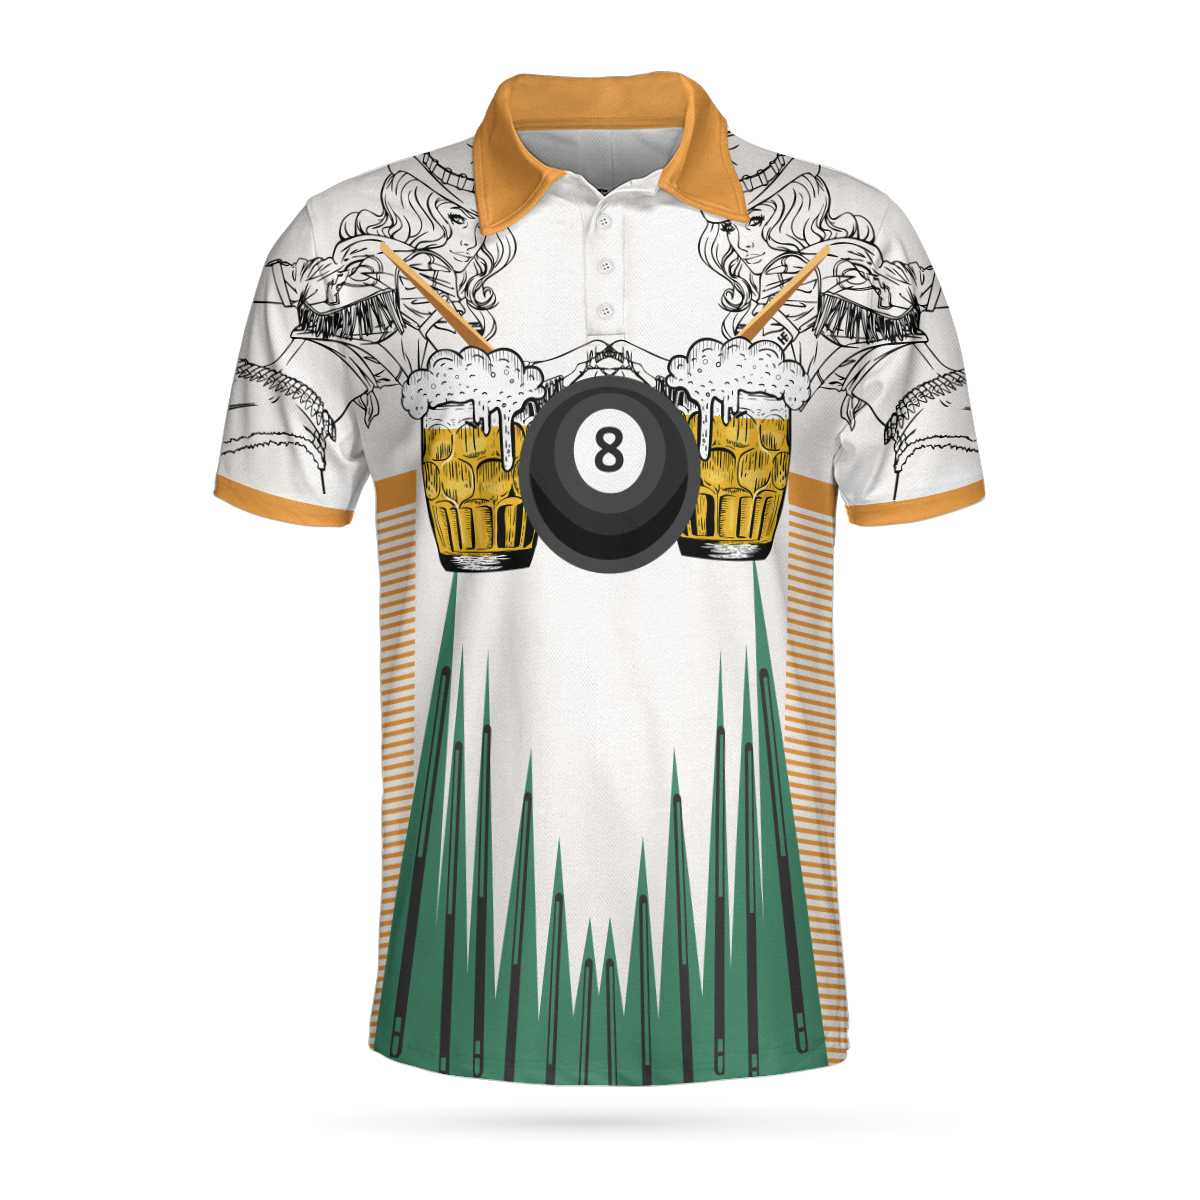 8-balls Billiards And Beer Cowgirl Polo Shirt/ That